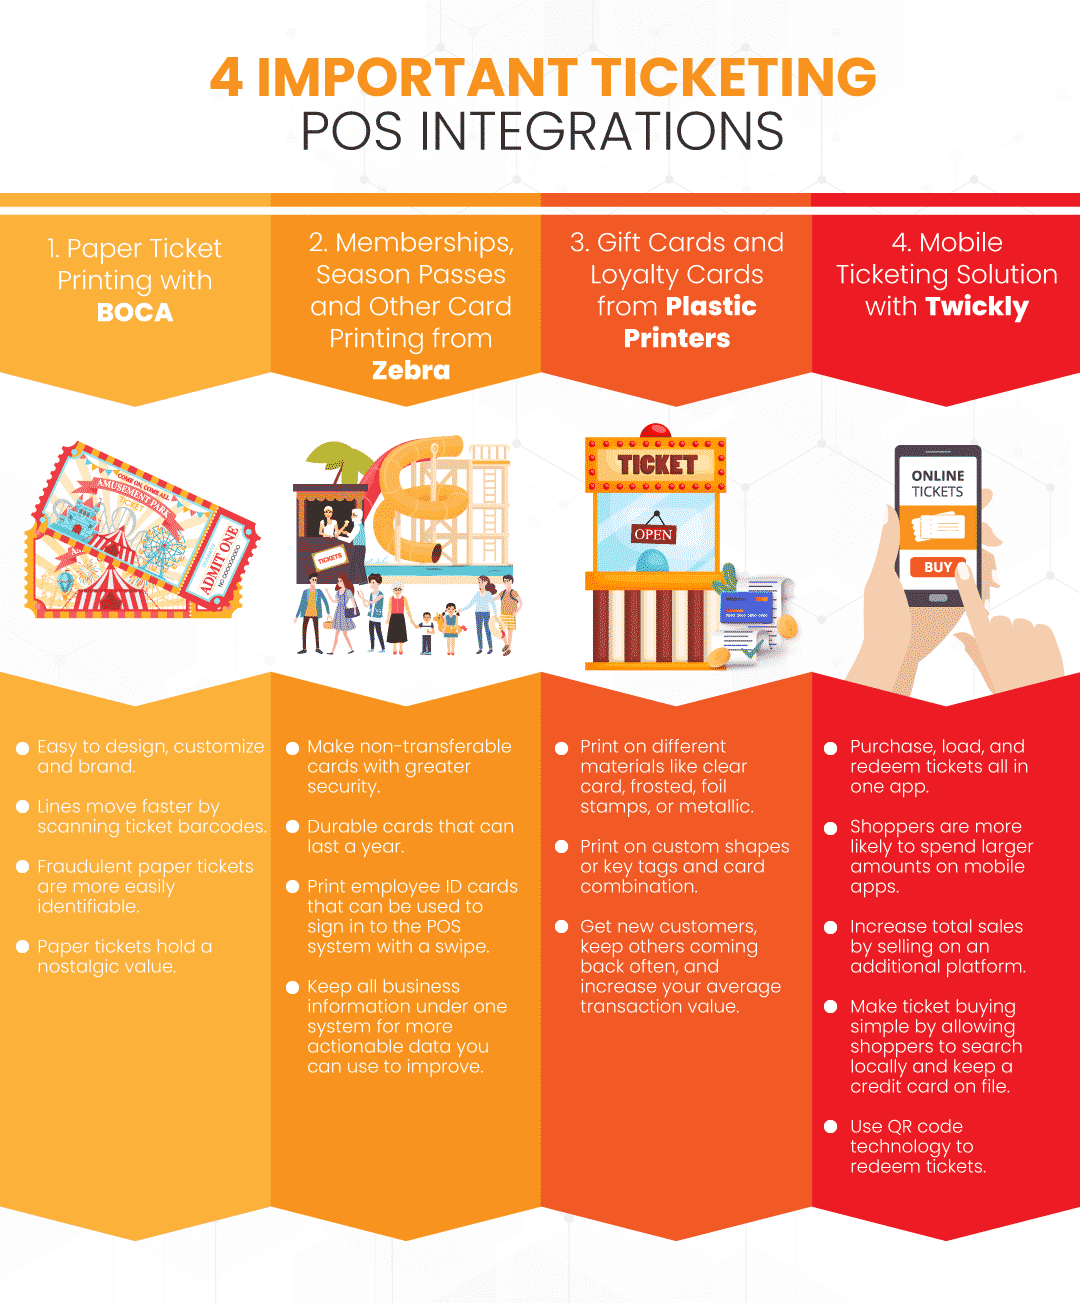 4 Important Ticketing POS Integrations infographic